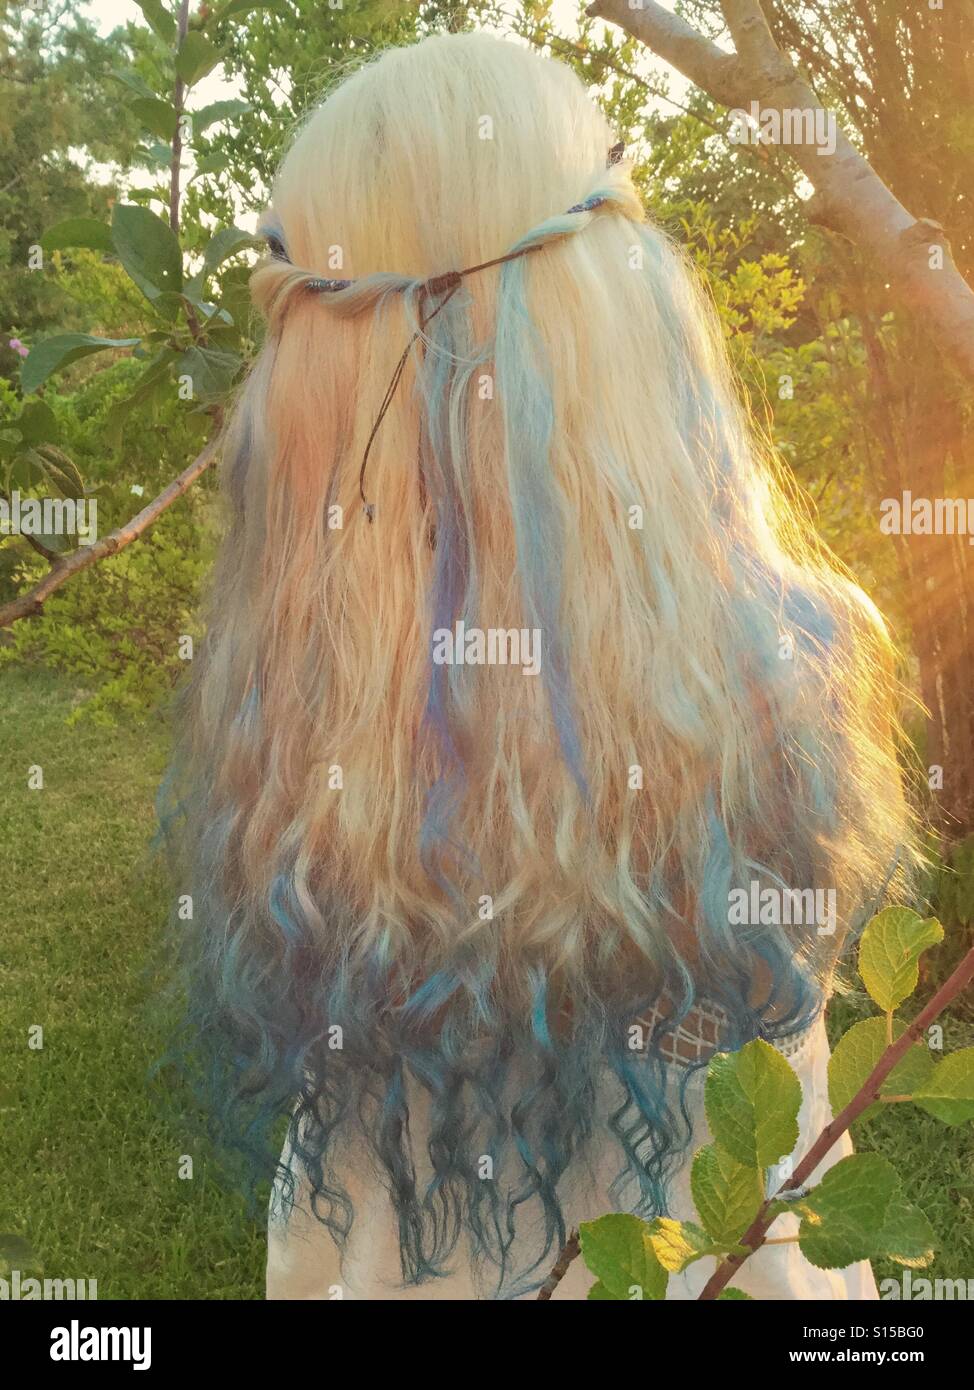 Blonde with blue ombre, rear view Stock Photo - Alamy